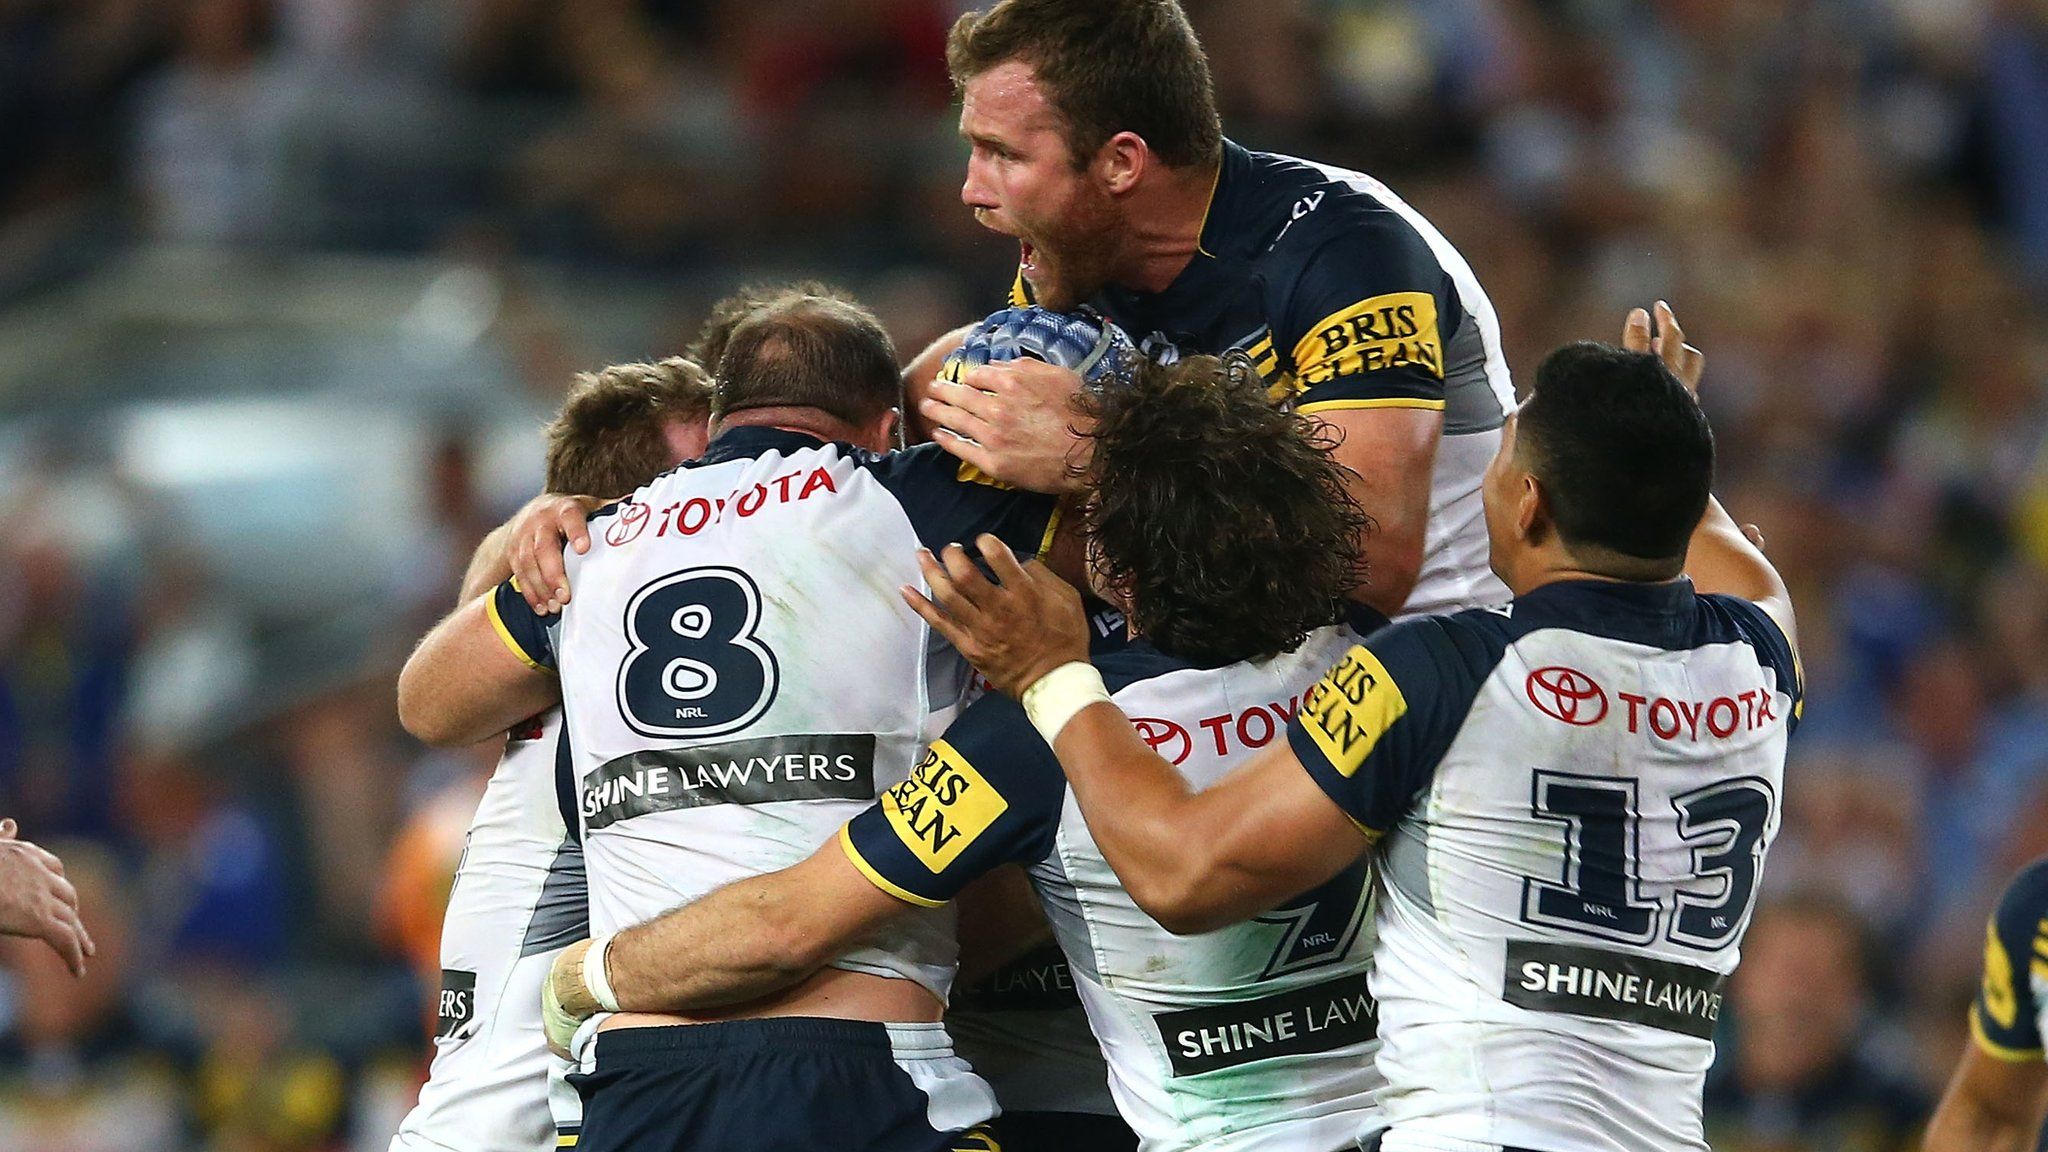 Johnathan Thurston buried by teammates after his drop goal winner